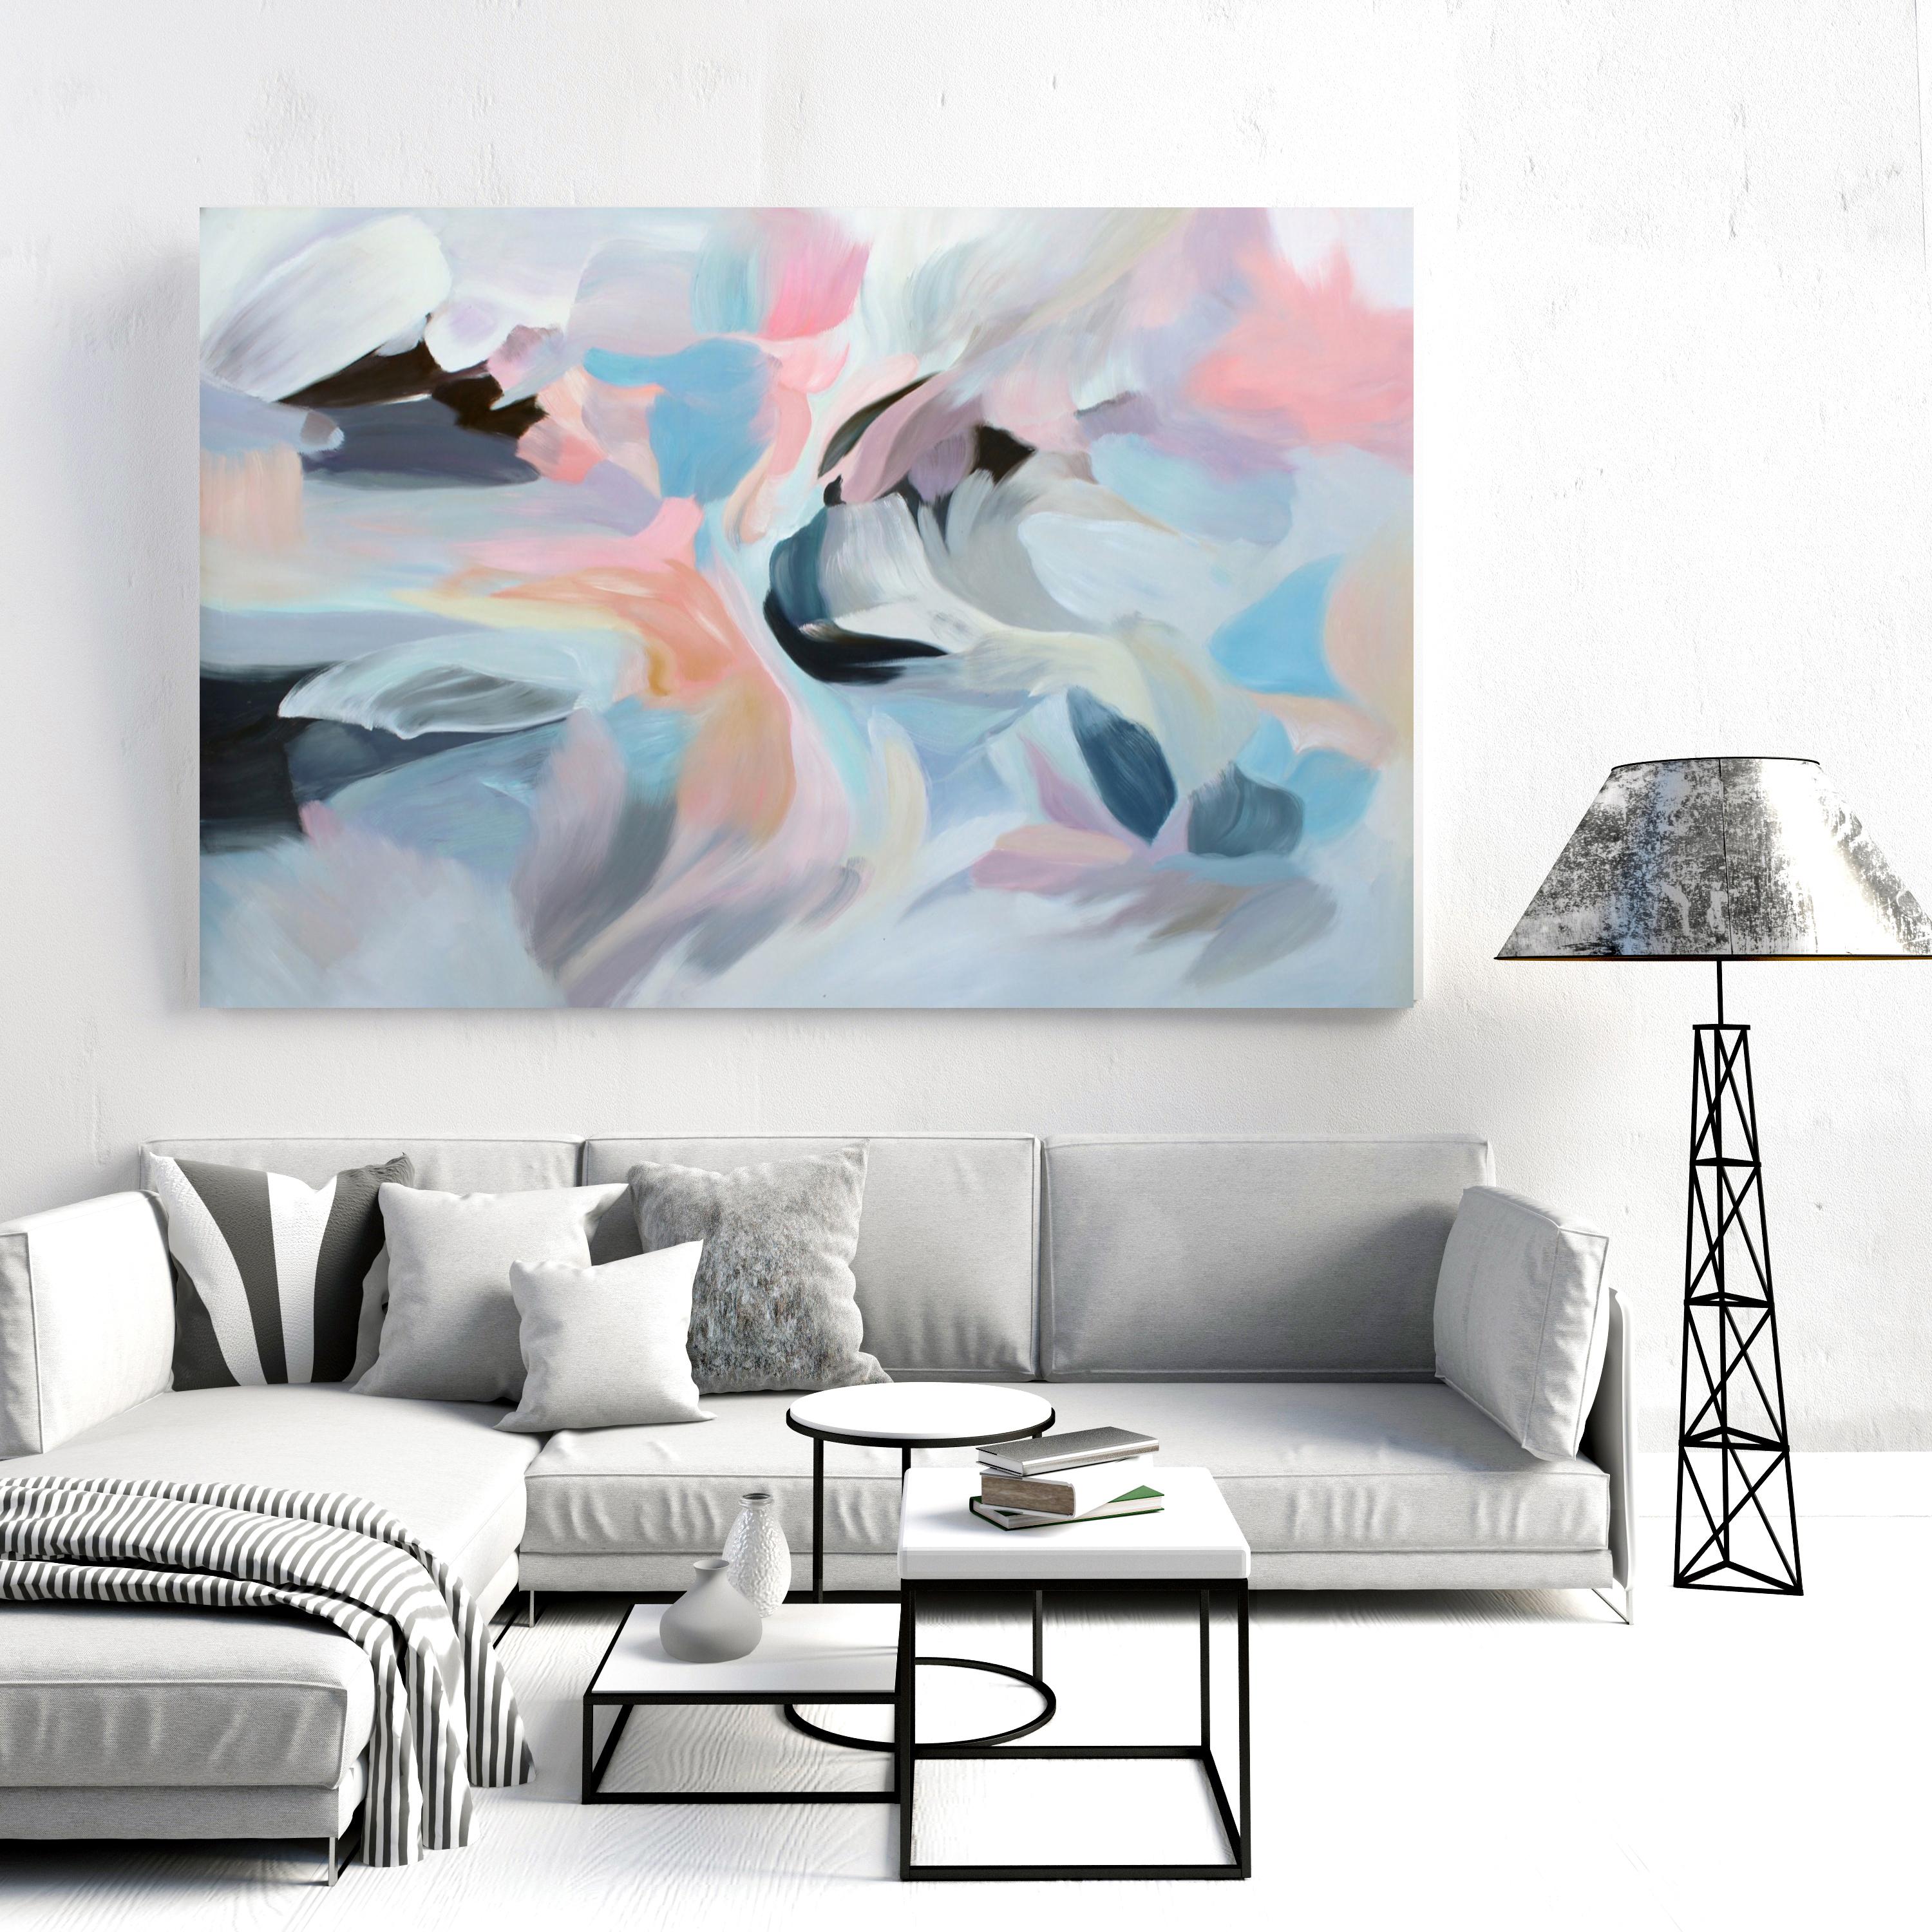 Irena Orlov Interior Painting - Vibrant Abstraction - Large Blue Pink Acrylic Painting, Display of Sensitivity